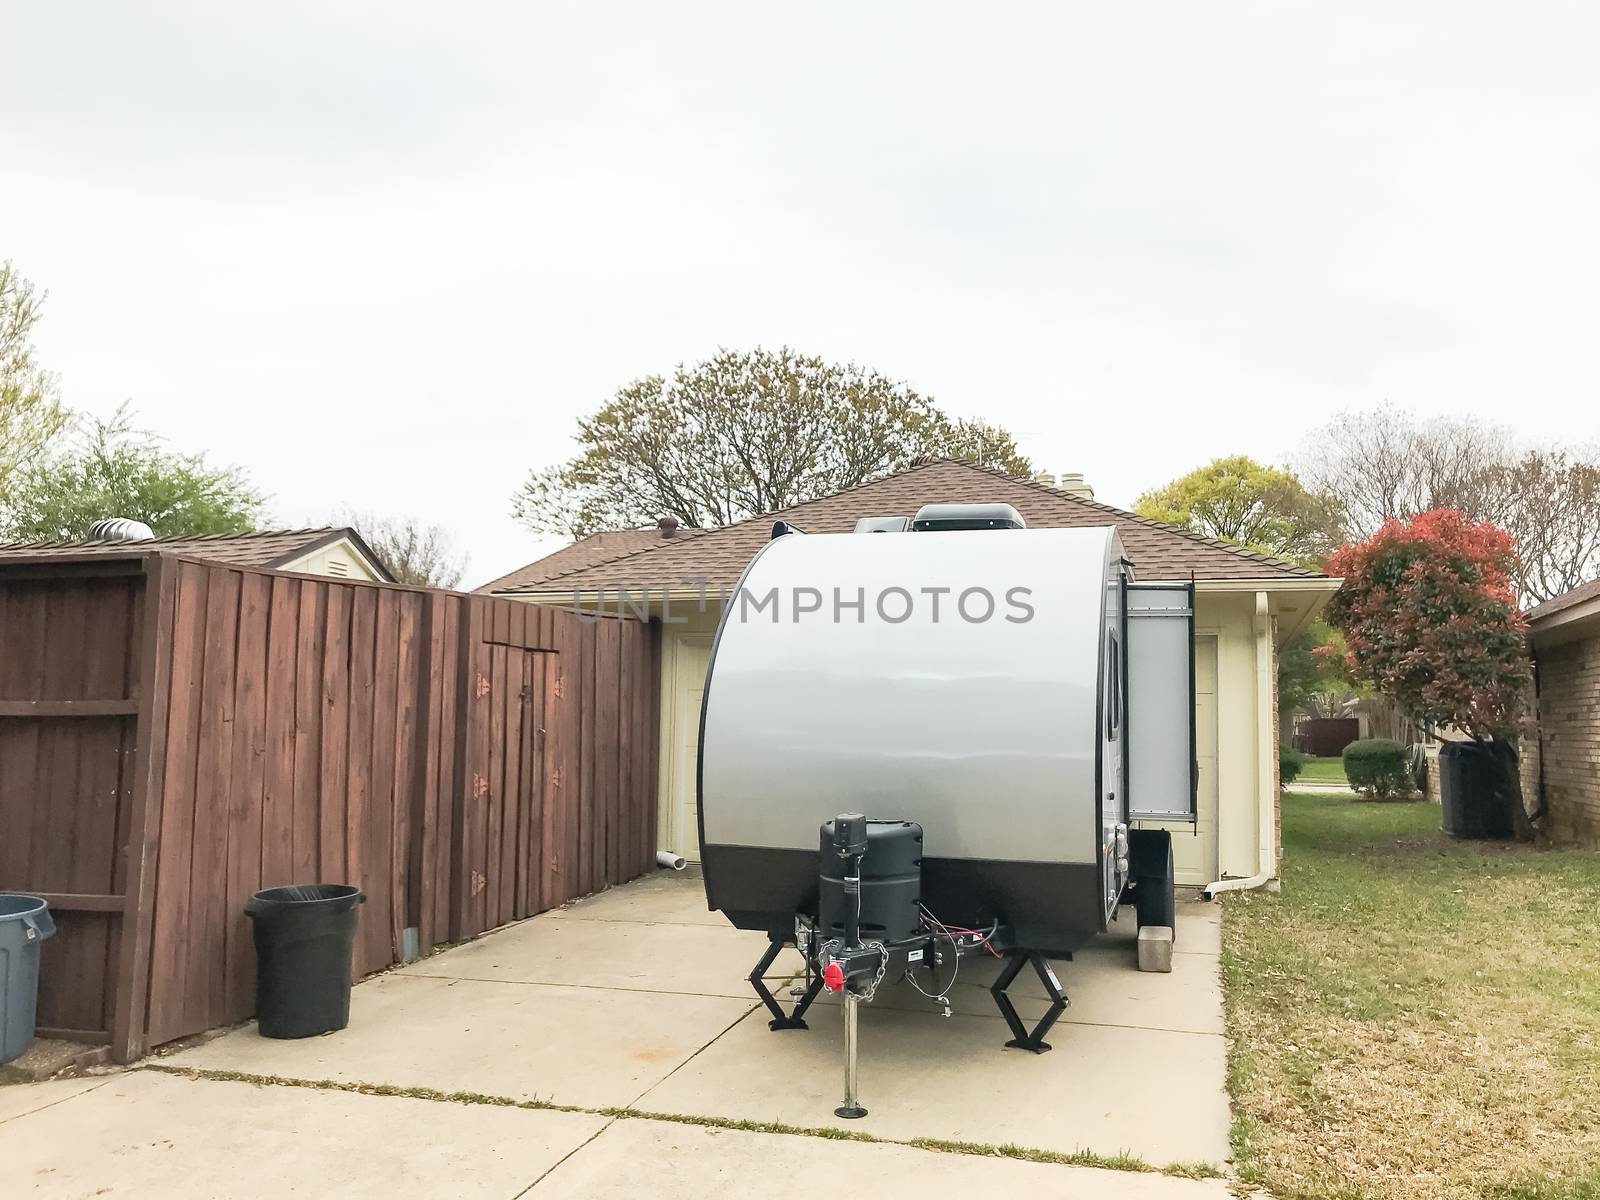 RV trailer parked at backyard of single family house, rear view by trongnguyen